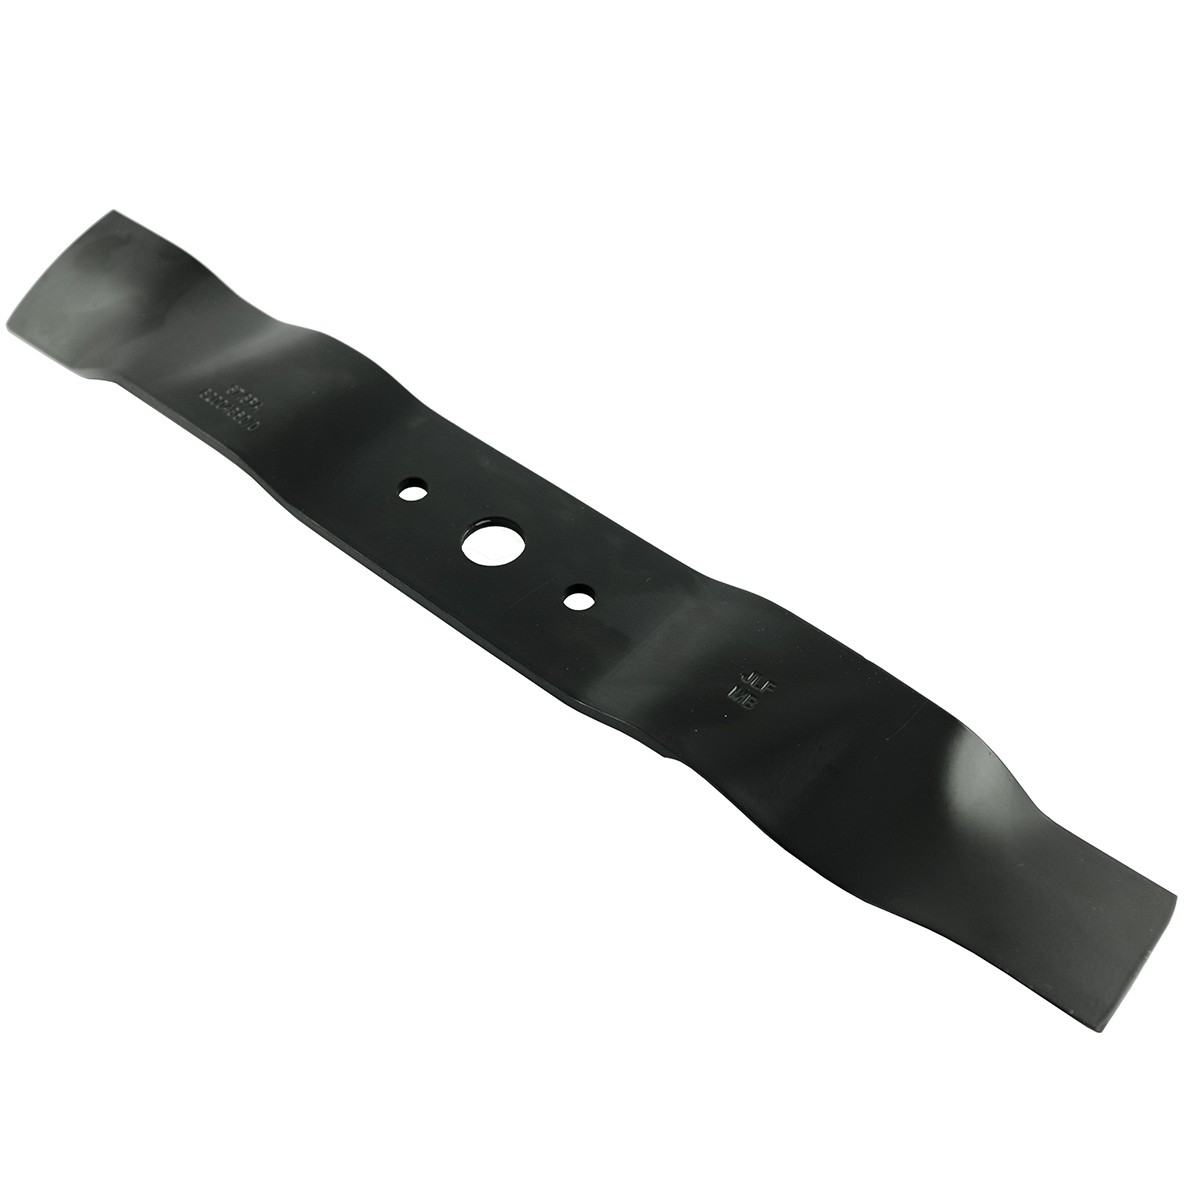 Mulching knife 418 mm, left rotating LEWY for STIGA Estate Master HST lawn tractor, 82004360/0